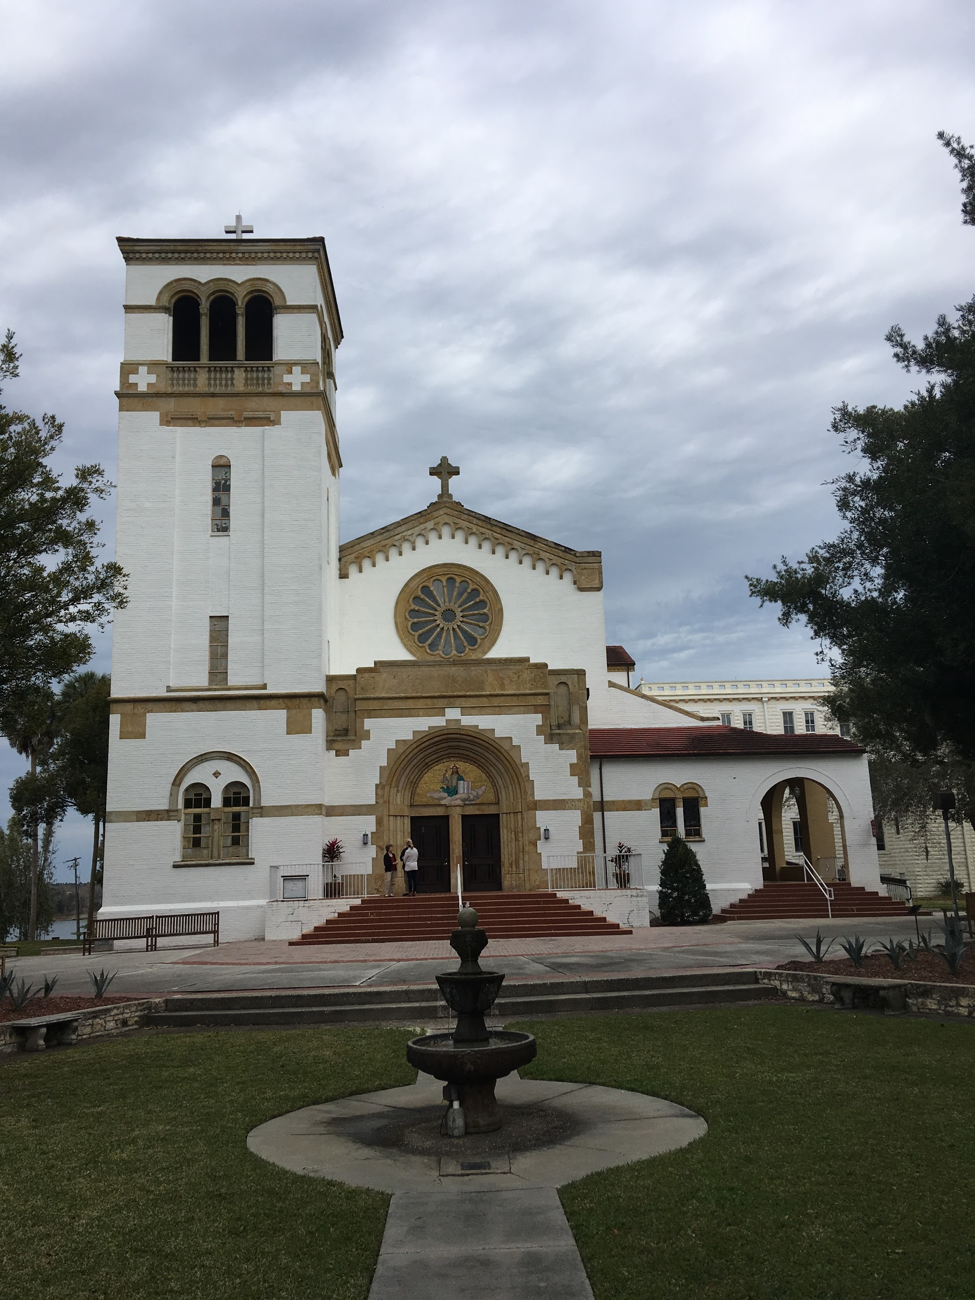 Outside view of the Saint Leo Abbey Church